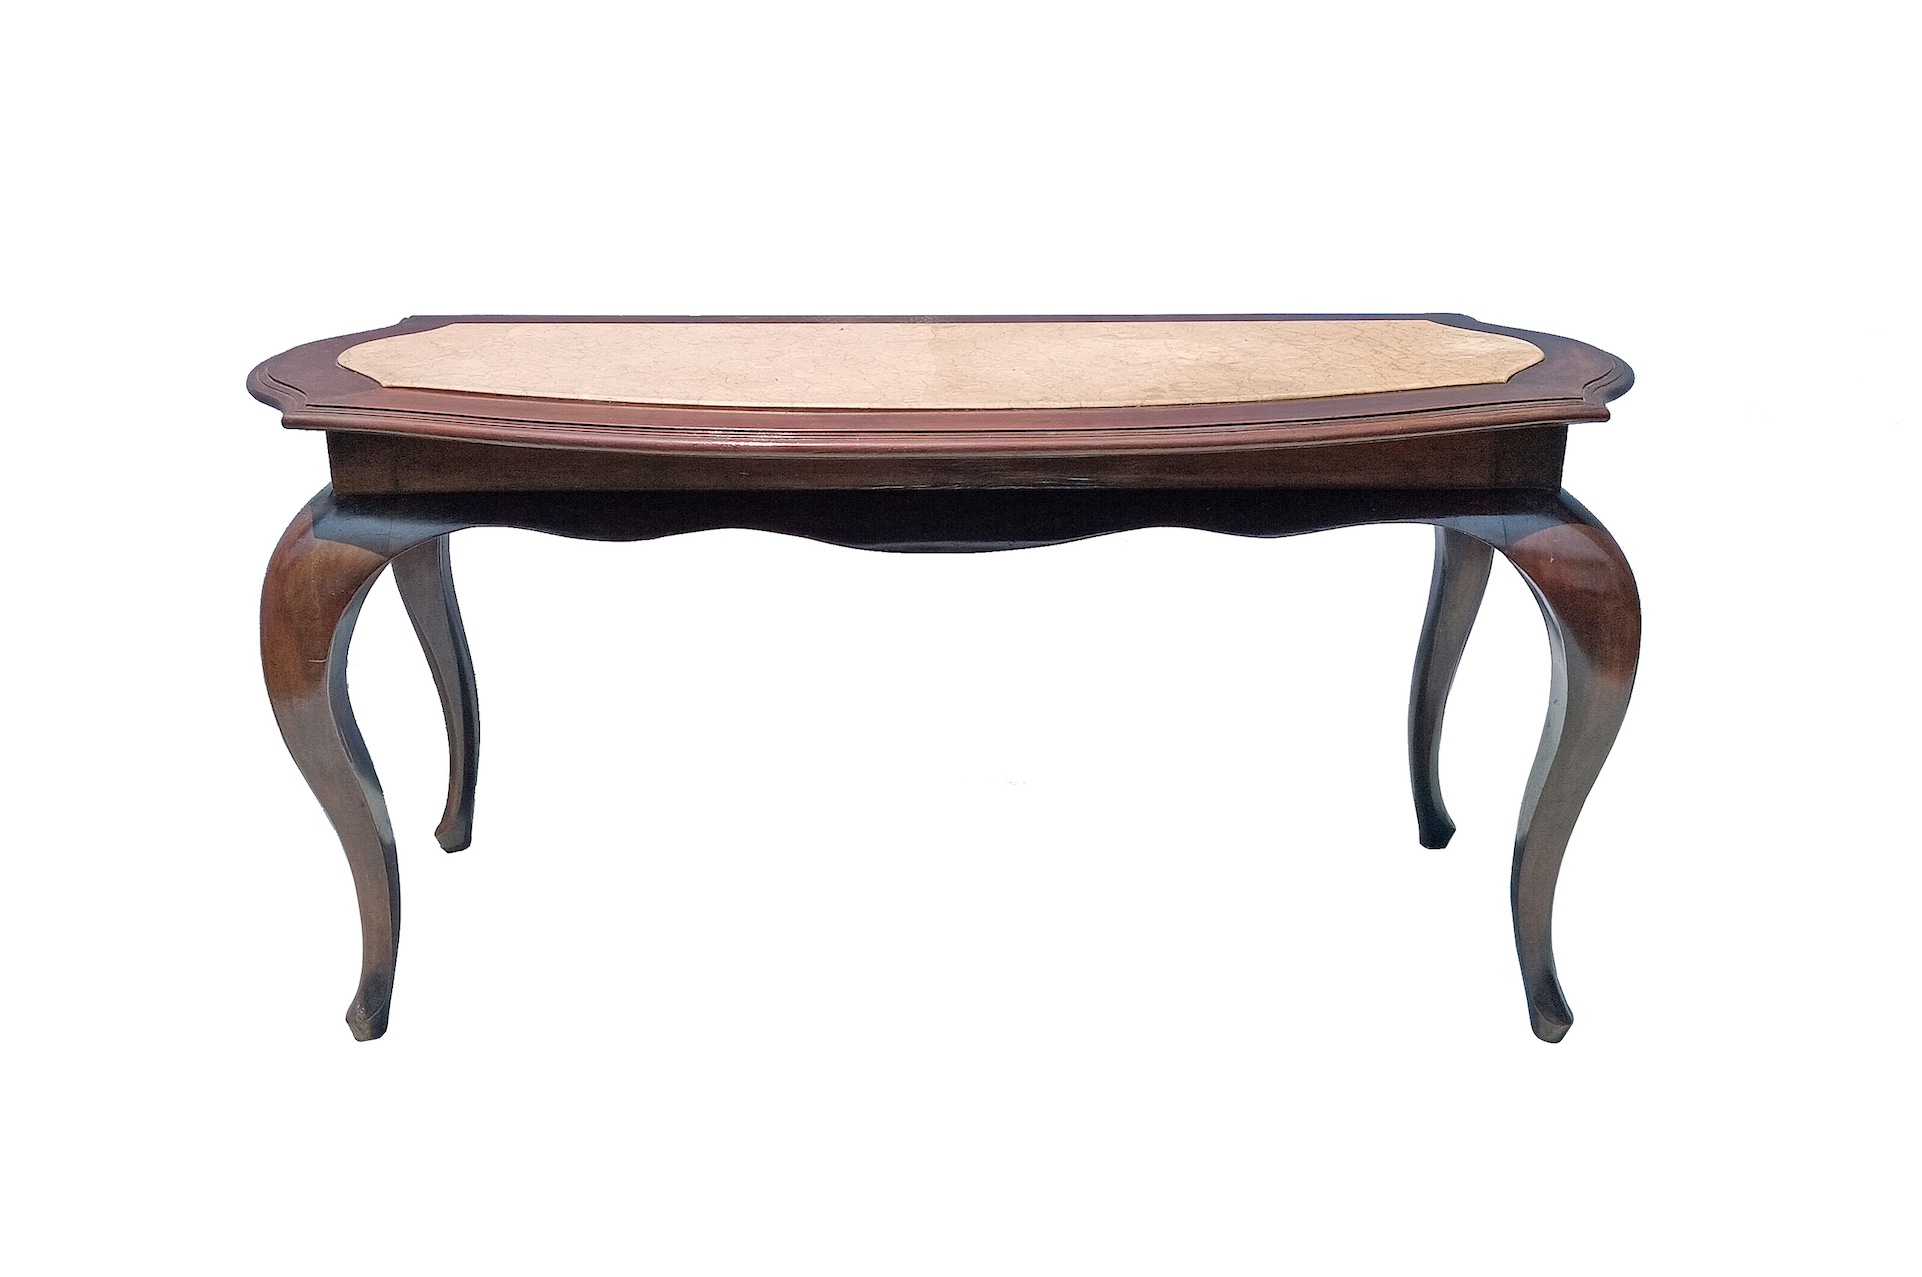 A 20th century carved teak oval table with marble top